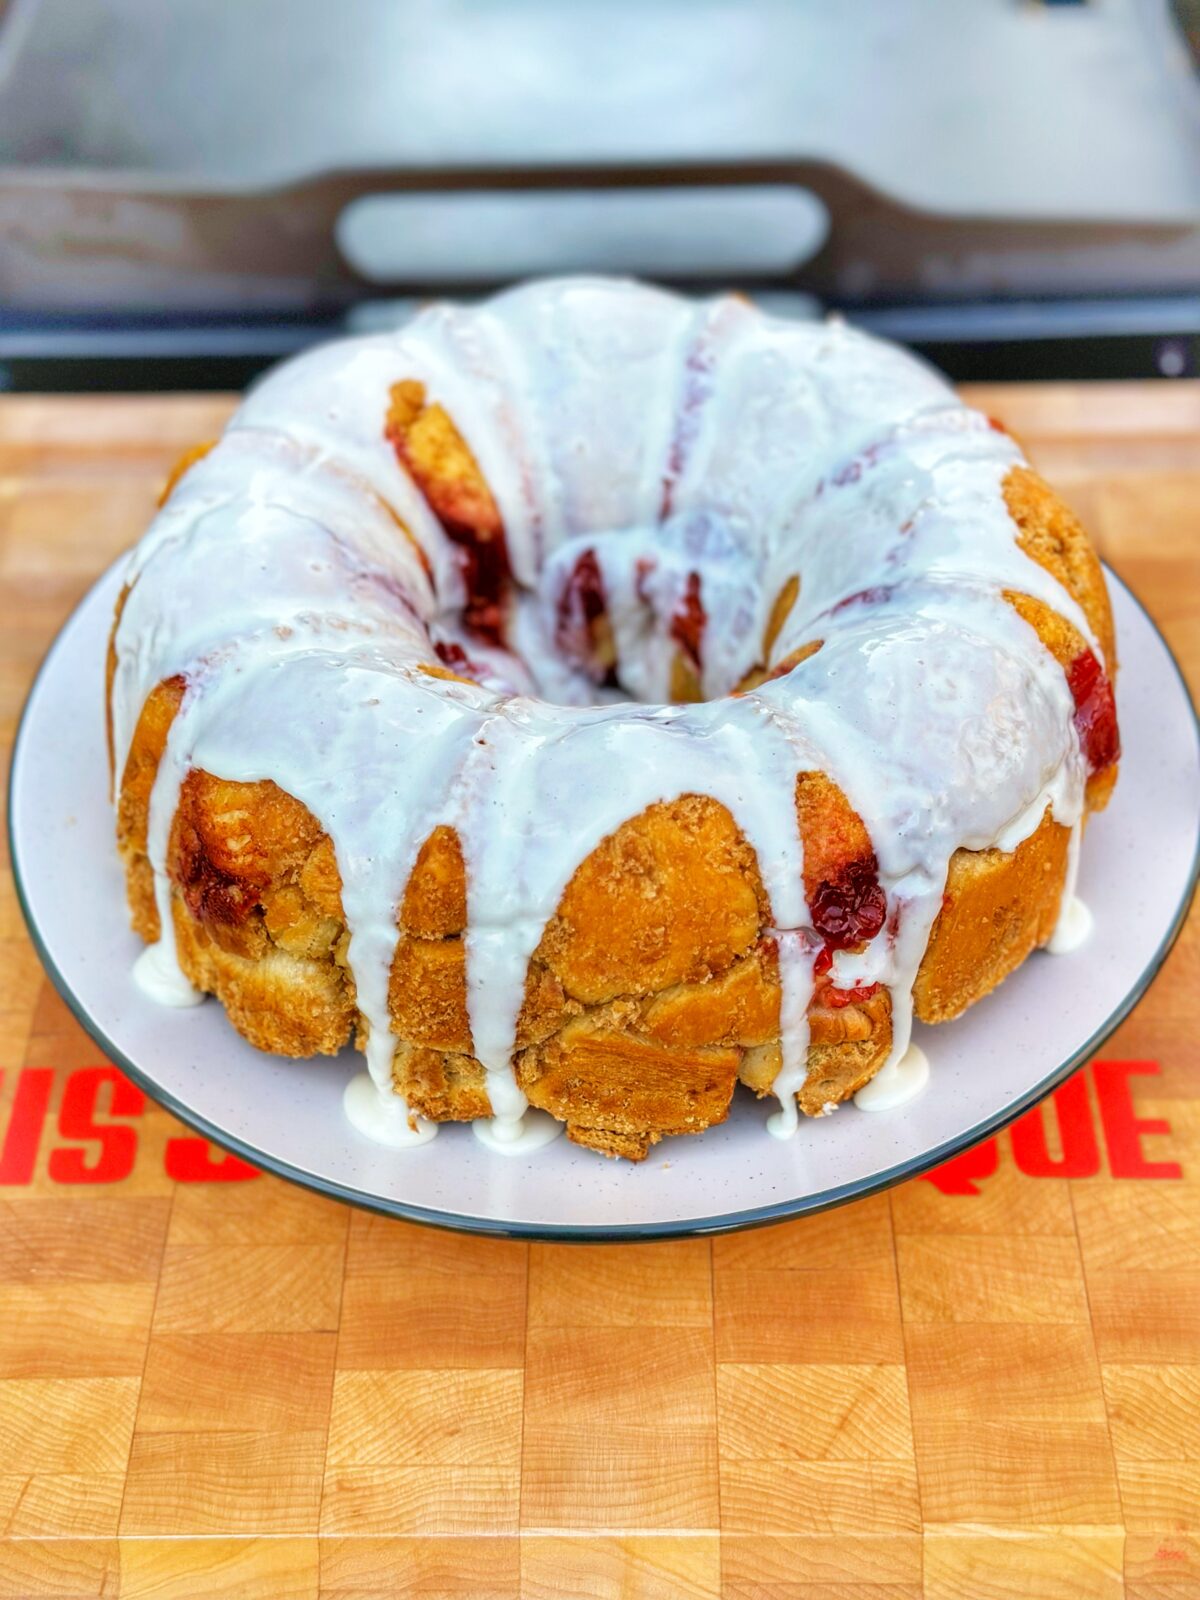 Cherry Cheesecake Monkey Bread finished and ready to enjoy.